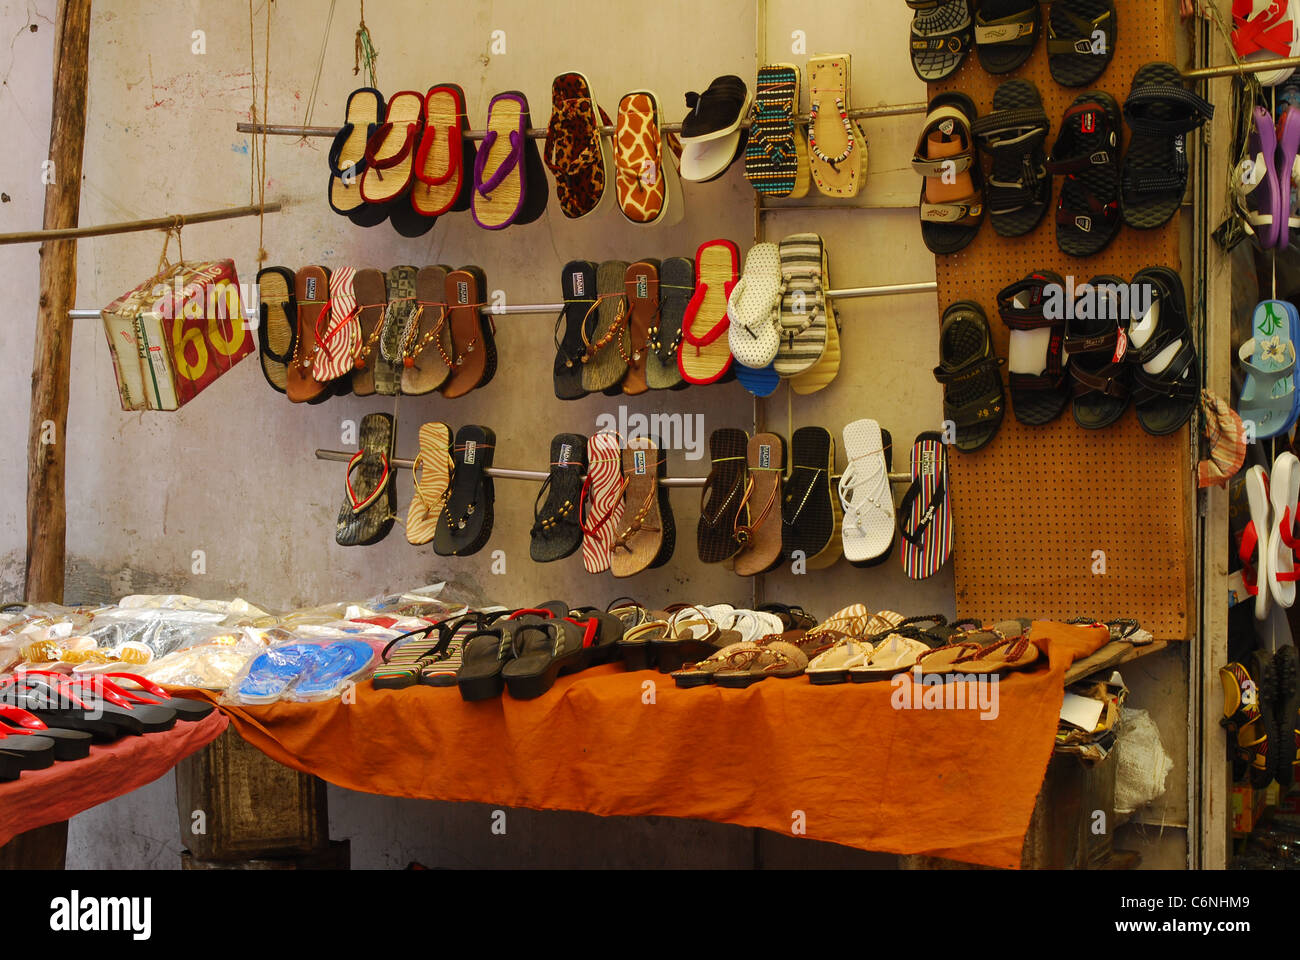 Slipper Display High Resolution Stock Photography and Images - Alamy